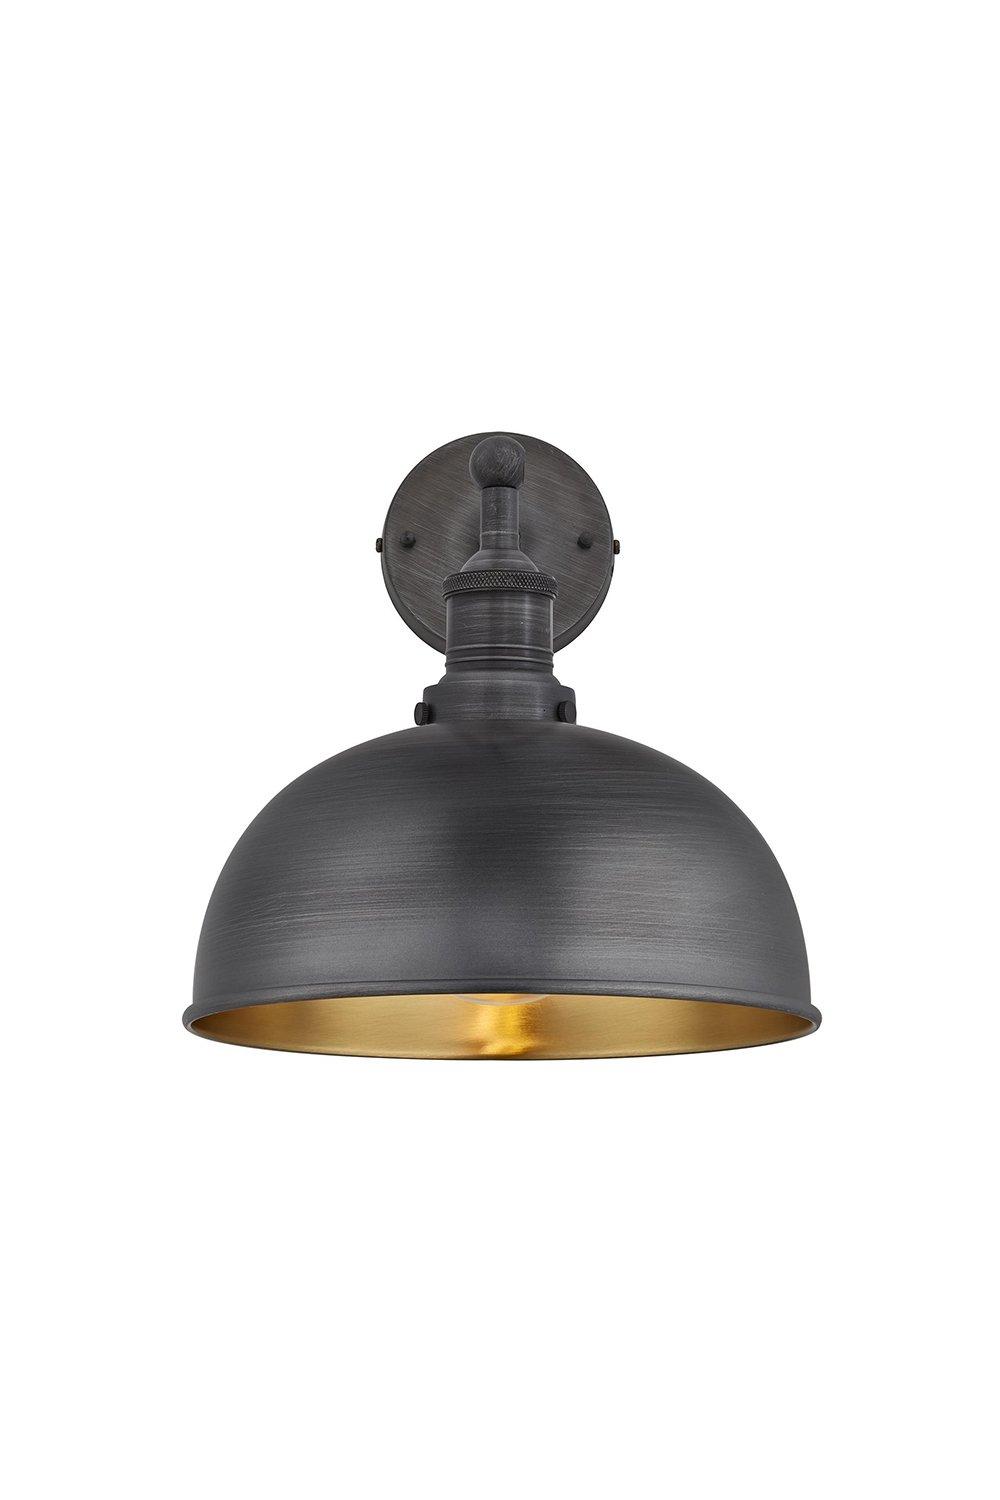 Brooklyn Dome Wall Light, 8 Inch, Pewter & Brass, Pewter Holder